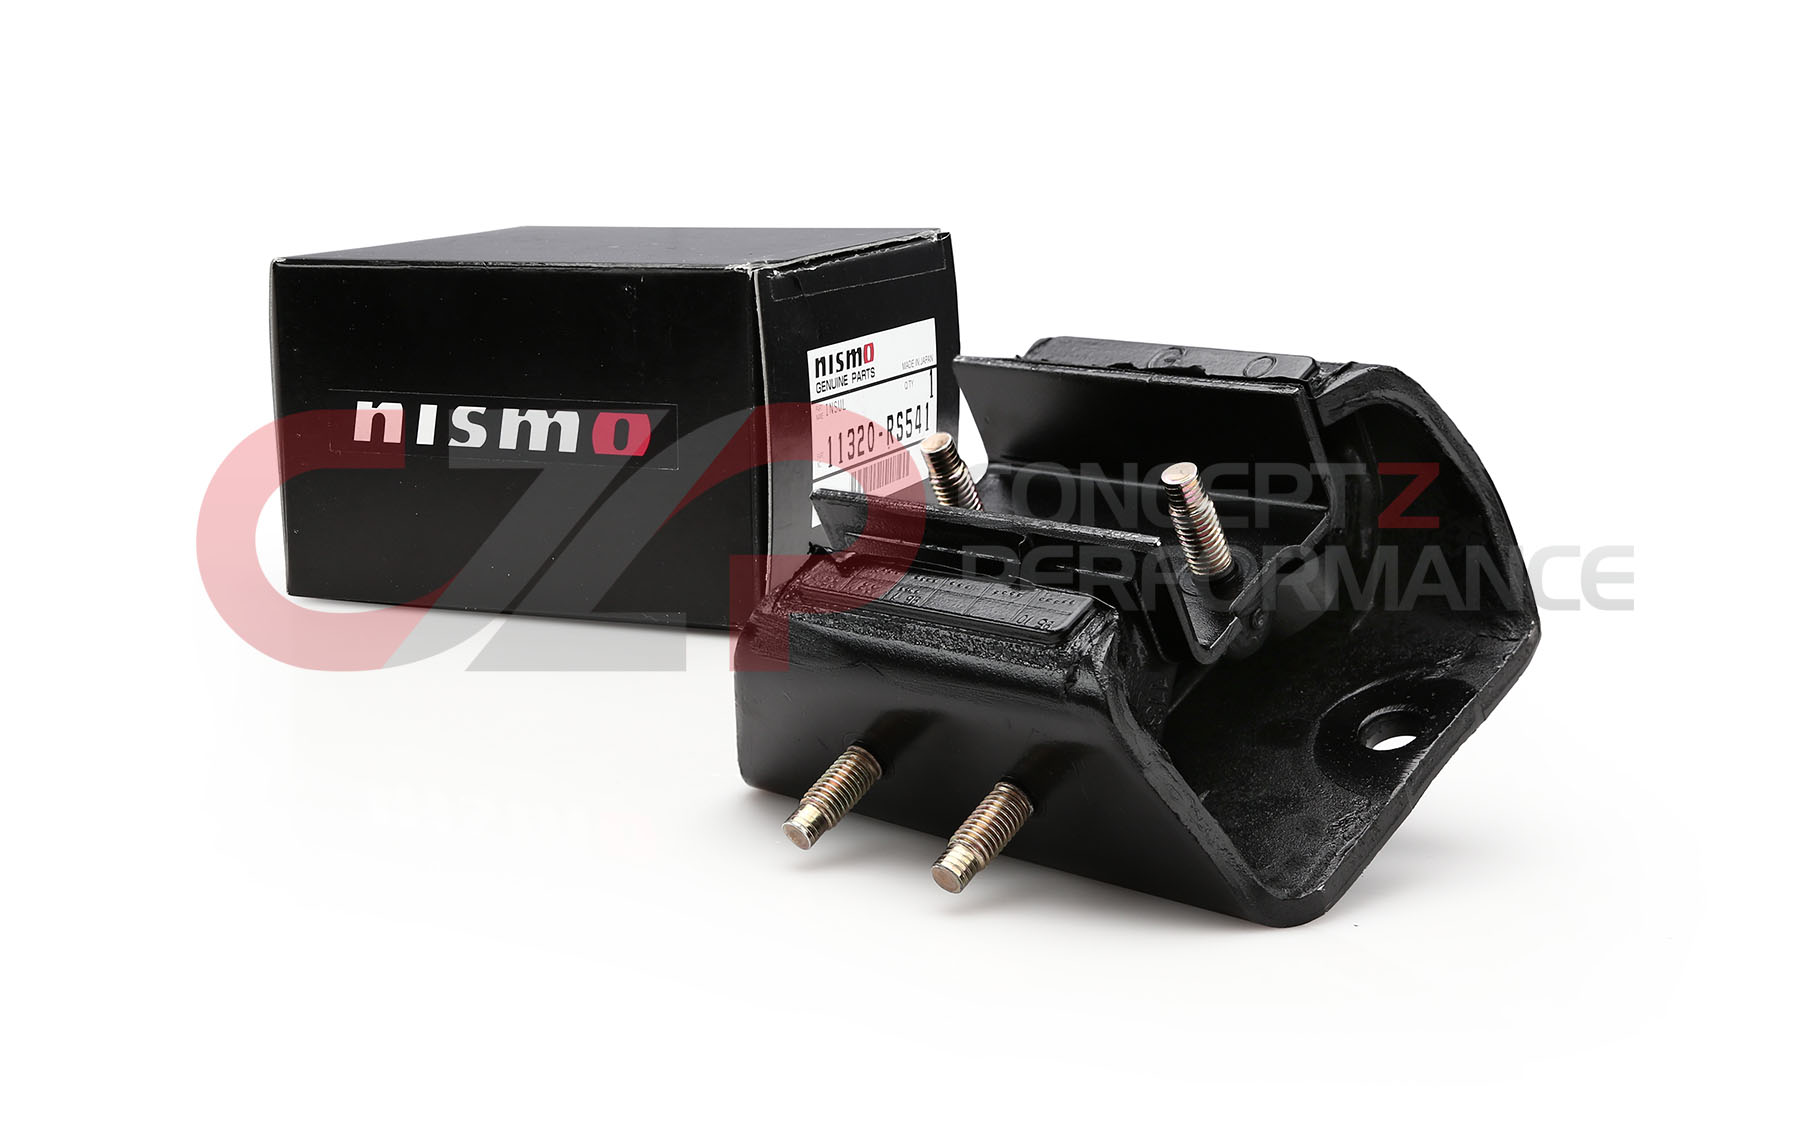 Nismo 11320-RS541 Reinforced Transmission Mount - Nissan 300ZX, 180SX, 240SX